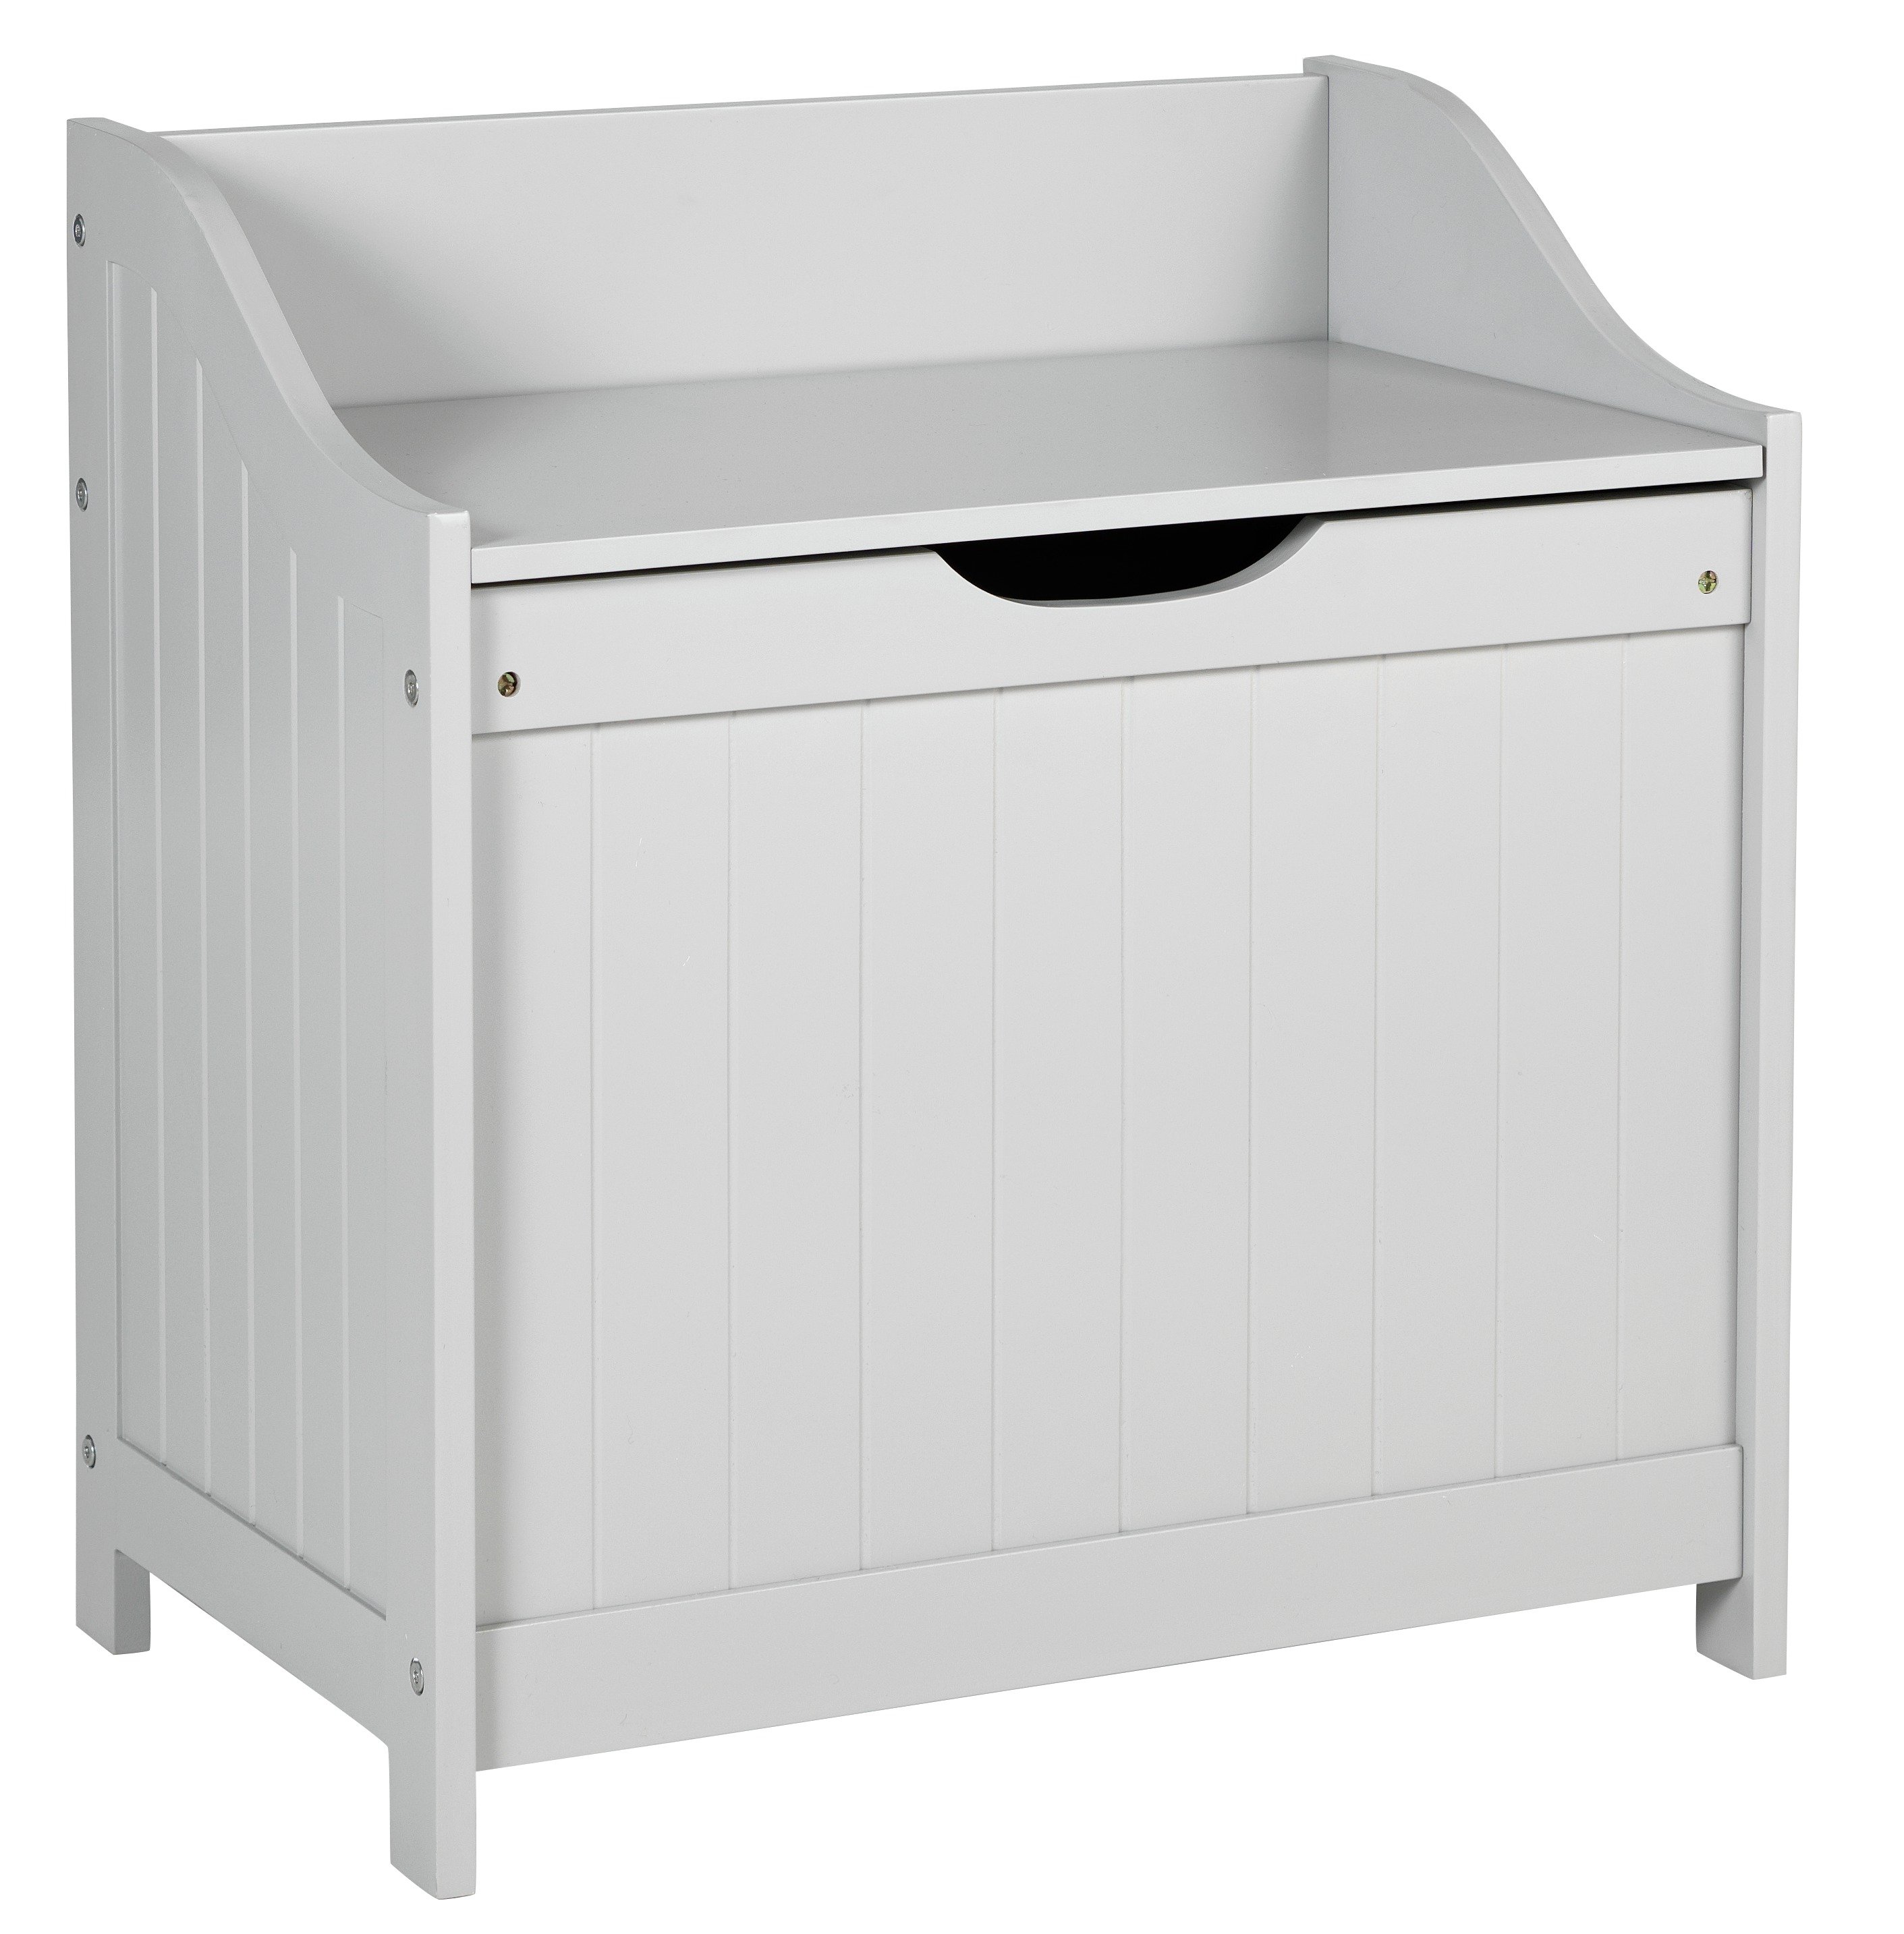 Argos Home 60 Litre Monks Bench Style Laundry Box - Grey